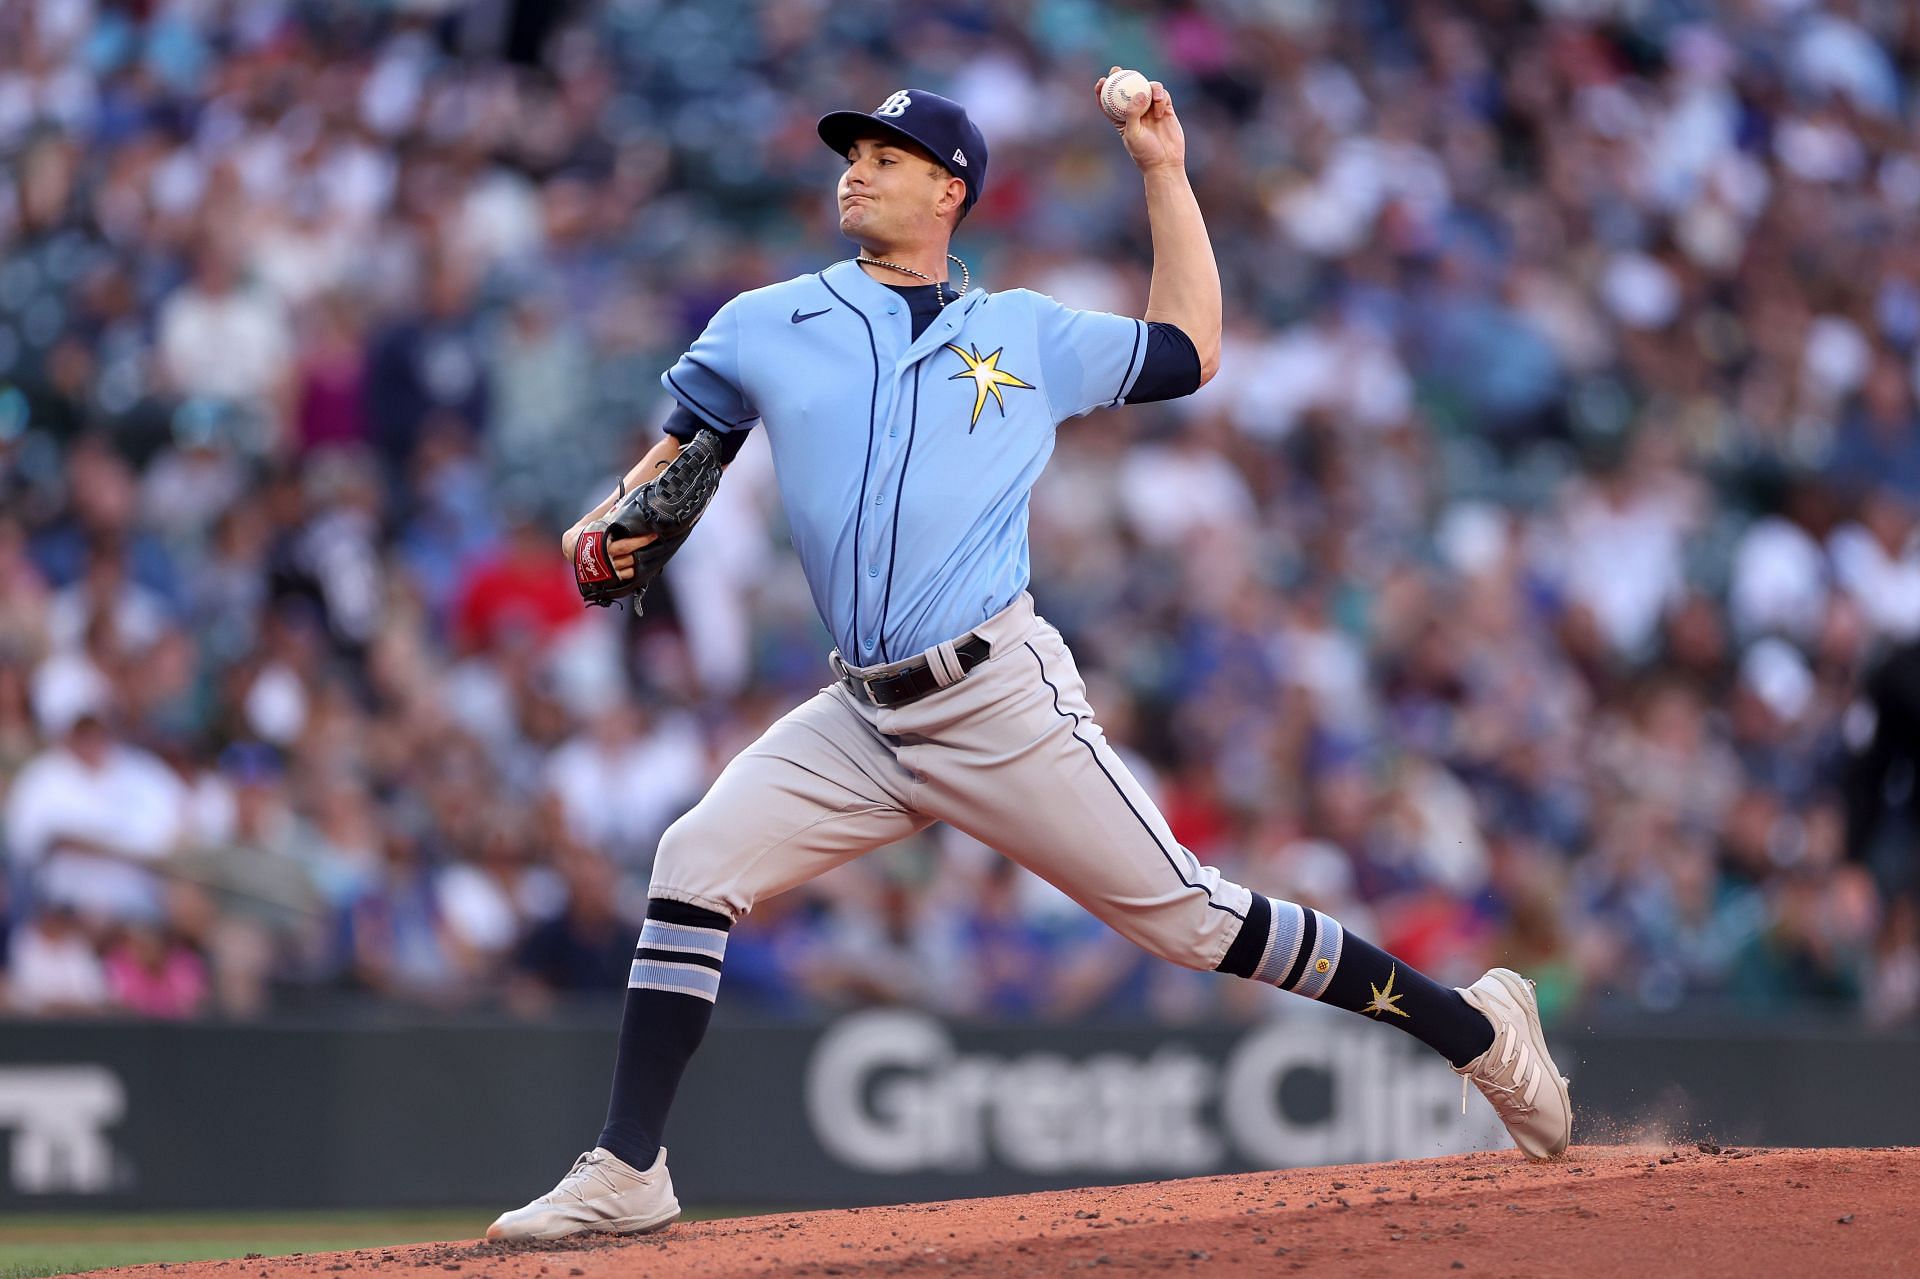 Shane McClanahan of the Tampa Bay Rays pitches against the Seattle Mariners at T-Mobile Park